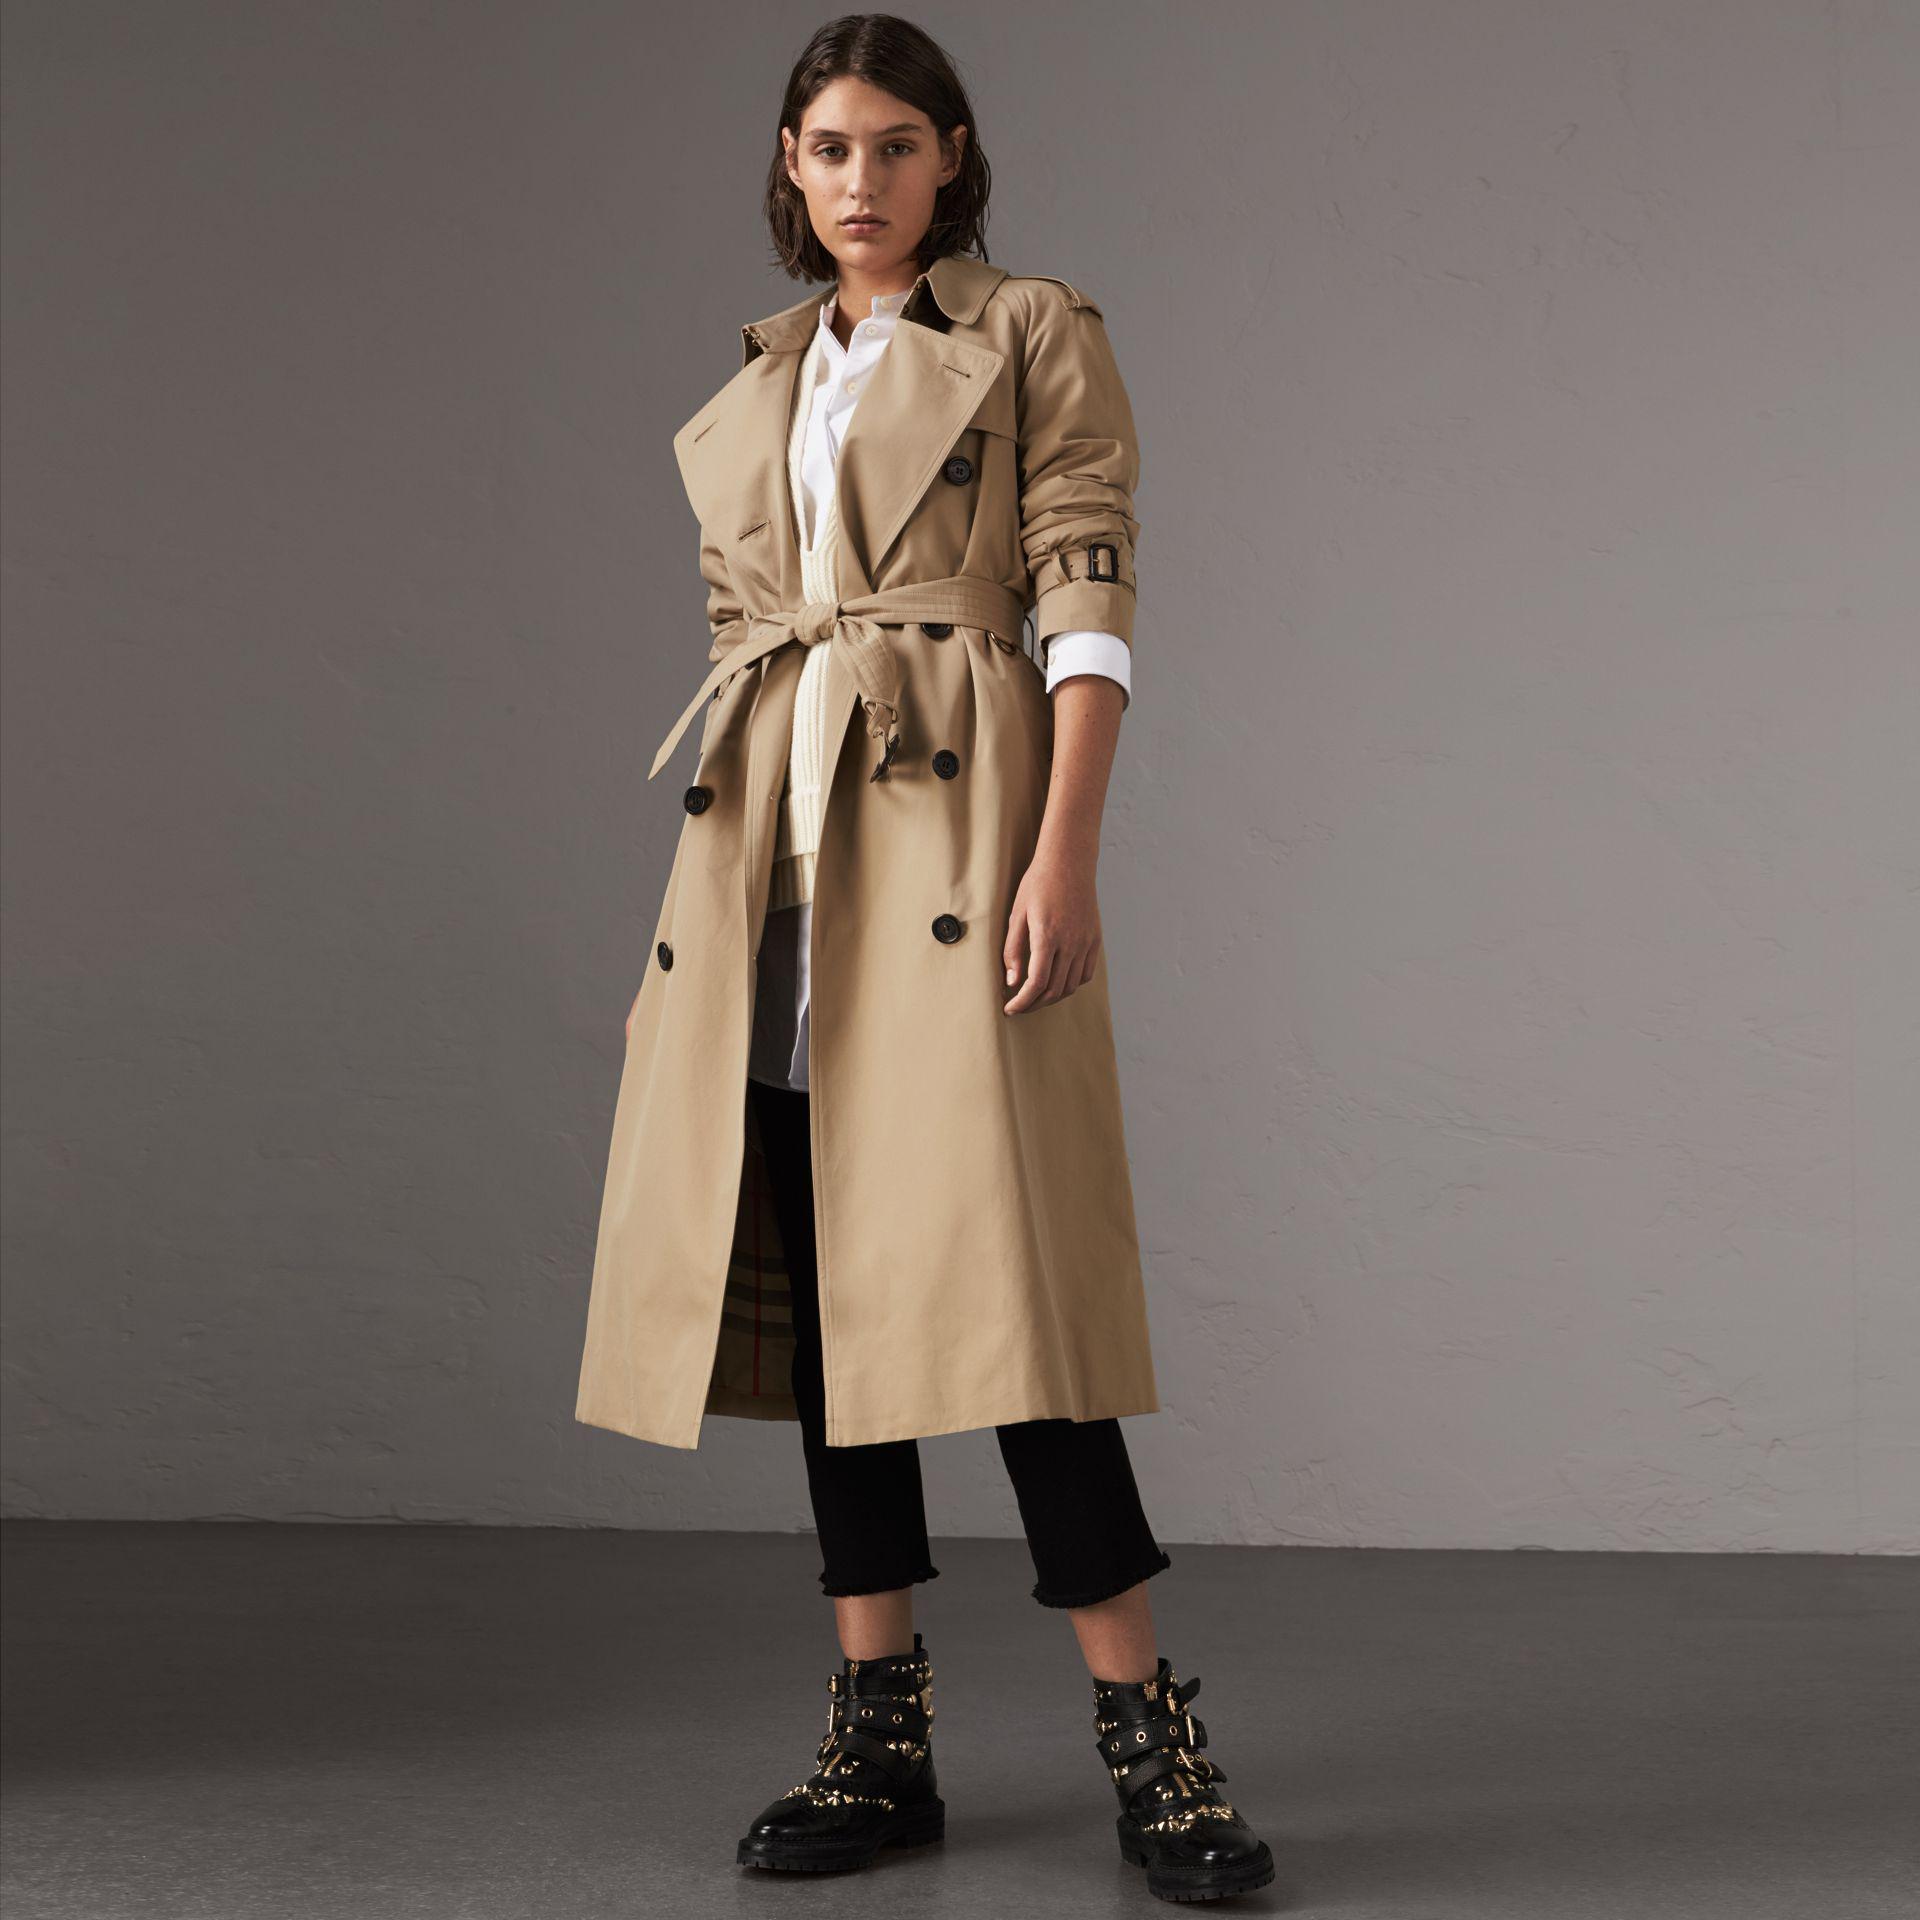 Burberry Westminster Long Trench Coat Online, Save 46% | jlcatj.gob.mx